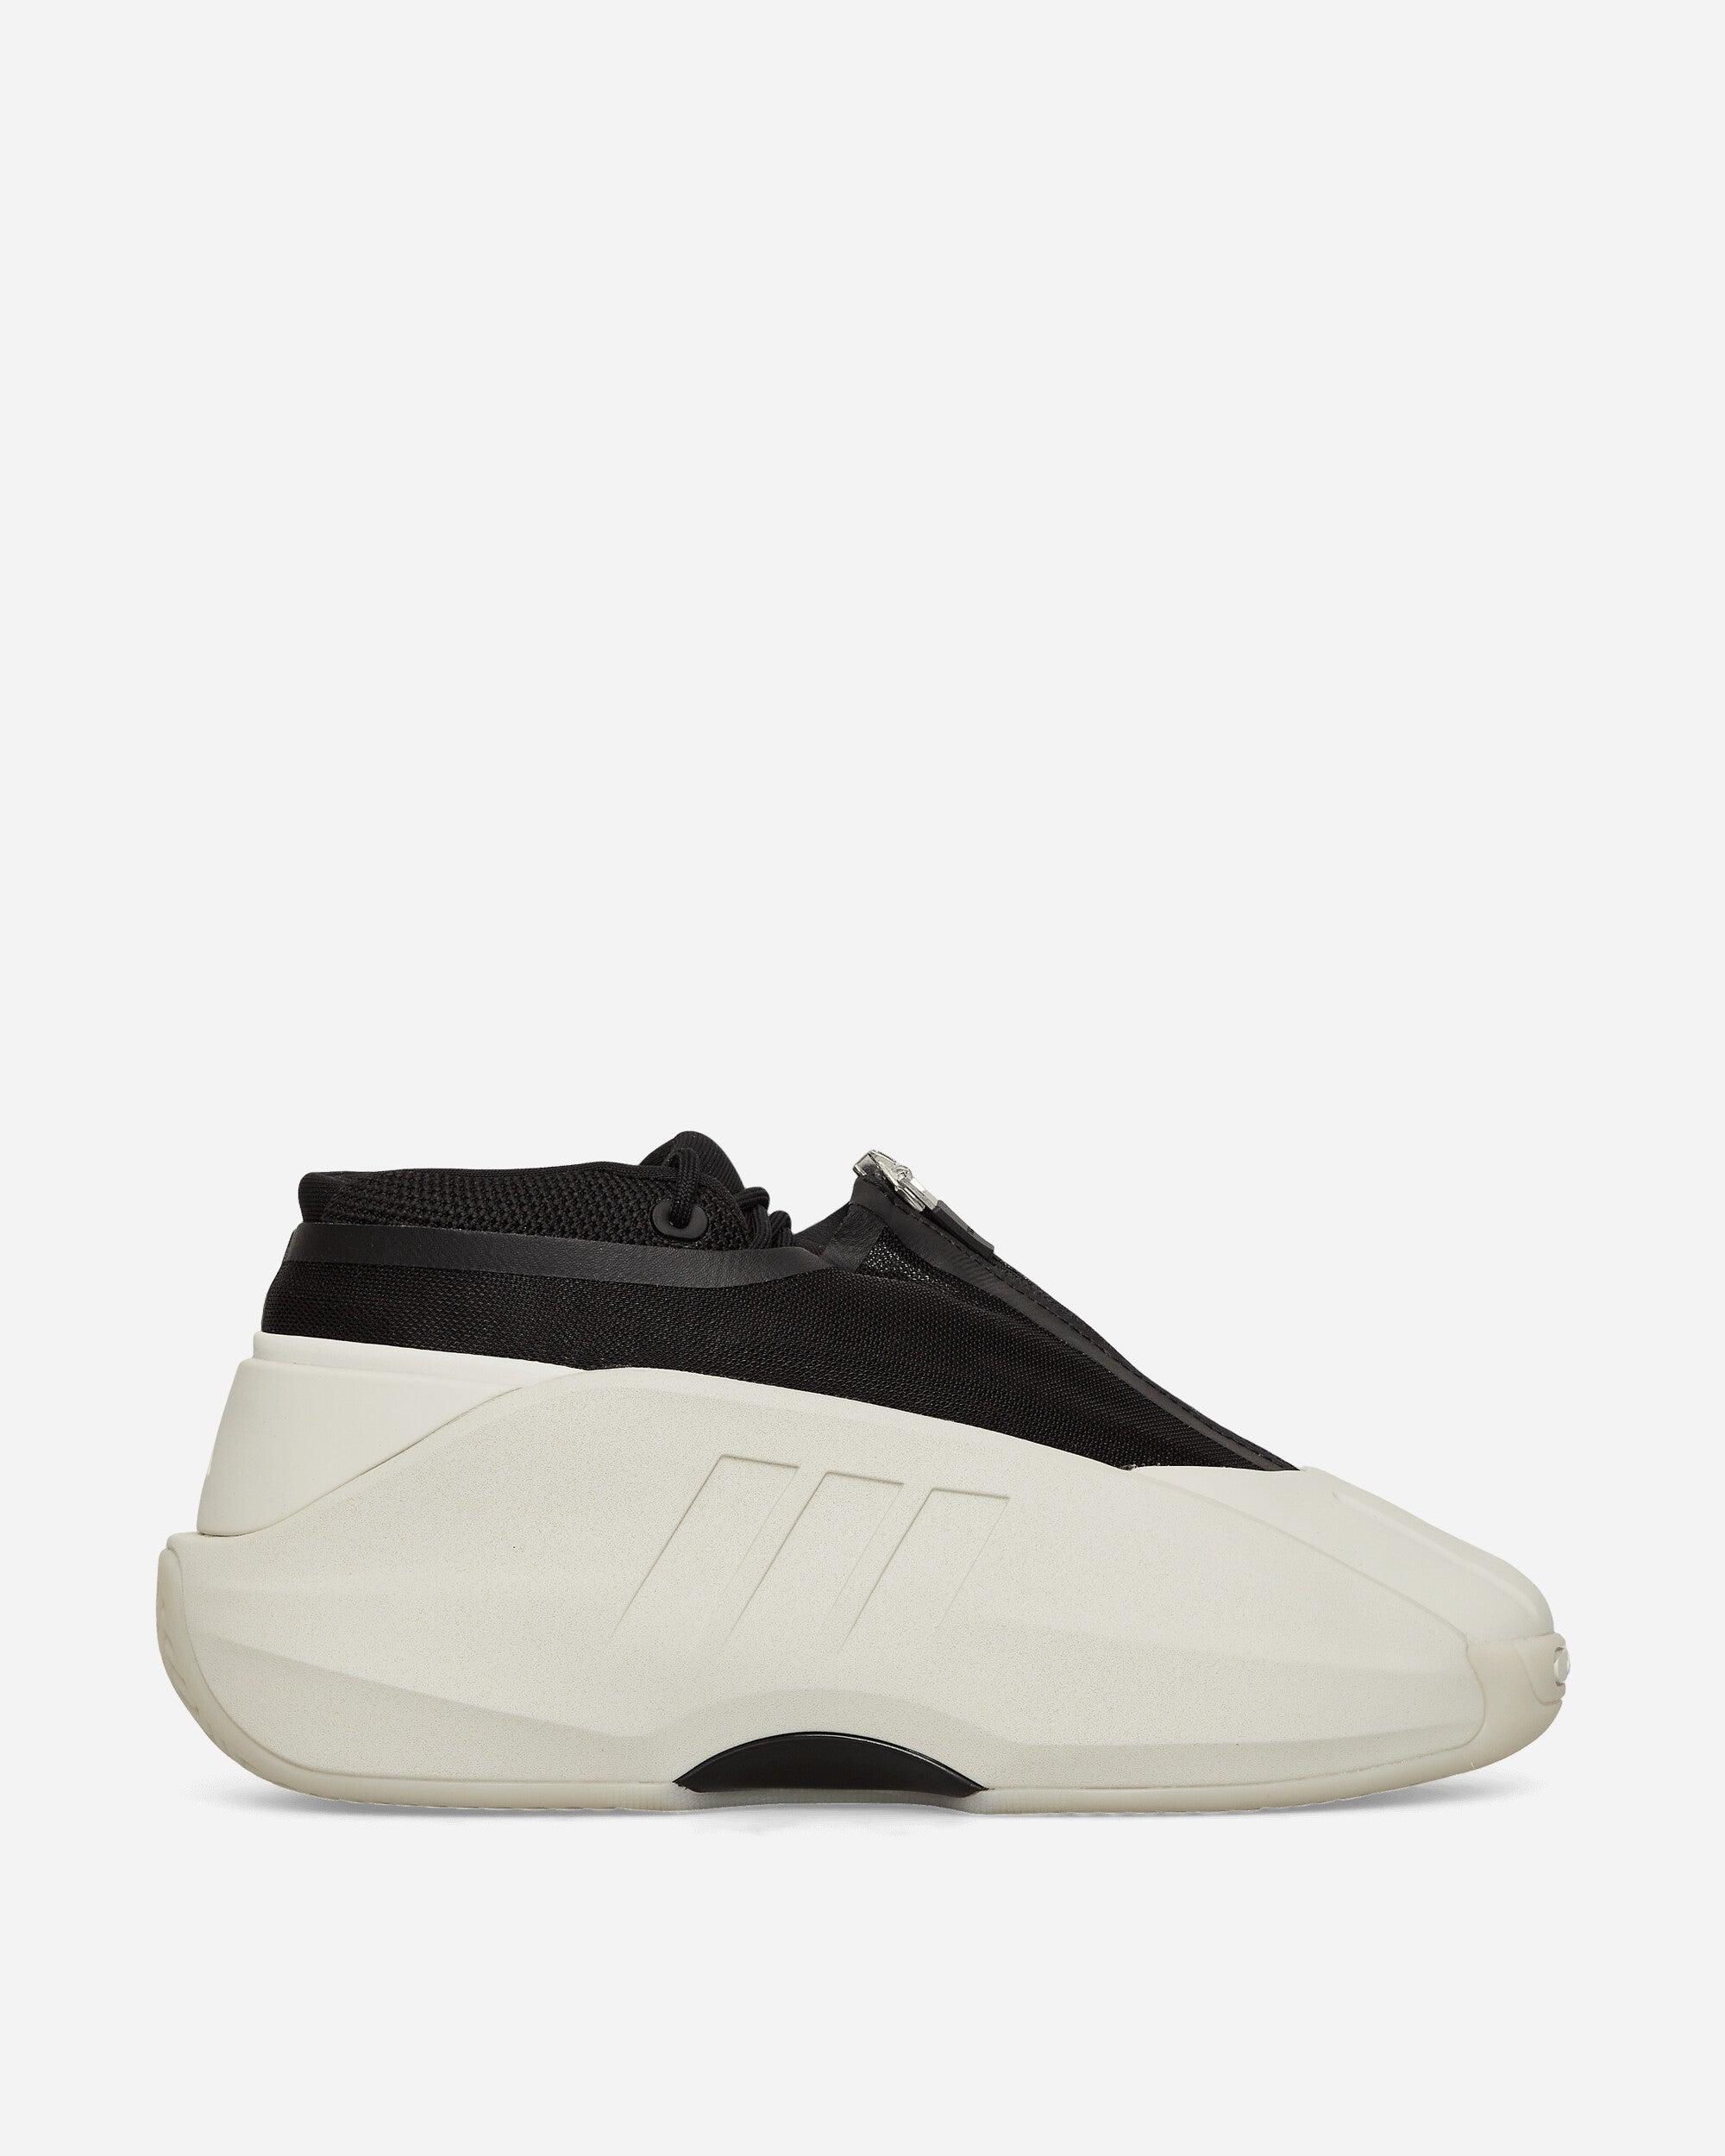 adidas Crazy Iiinfinity 003 Sneakers Talc / Core Black in White | Lyst